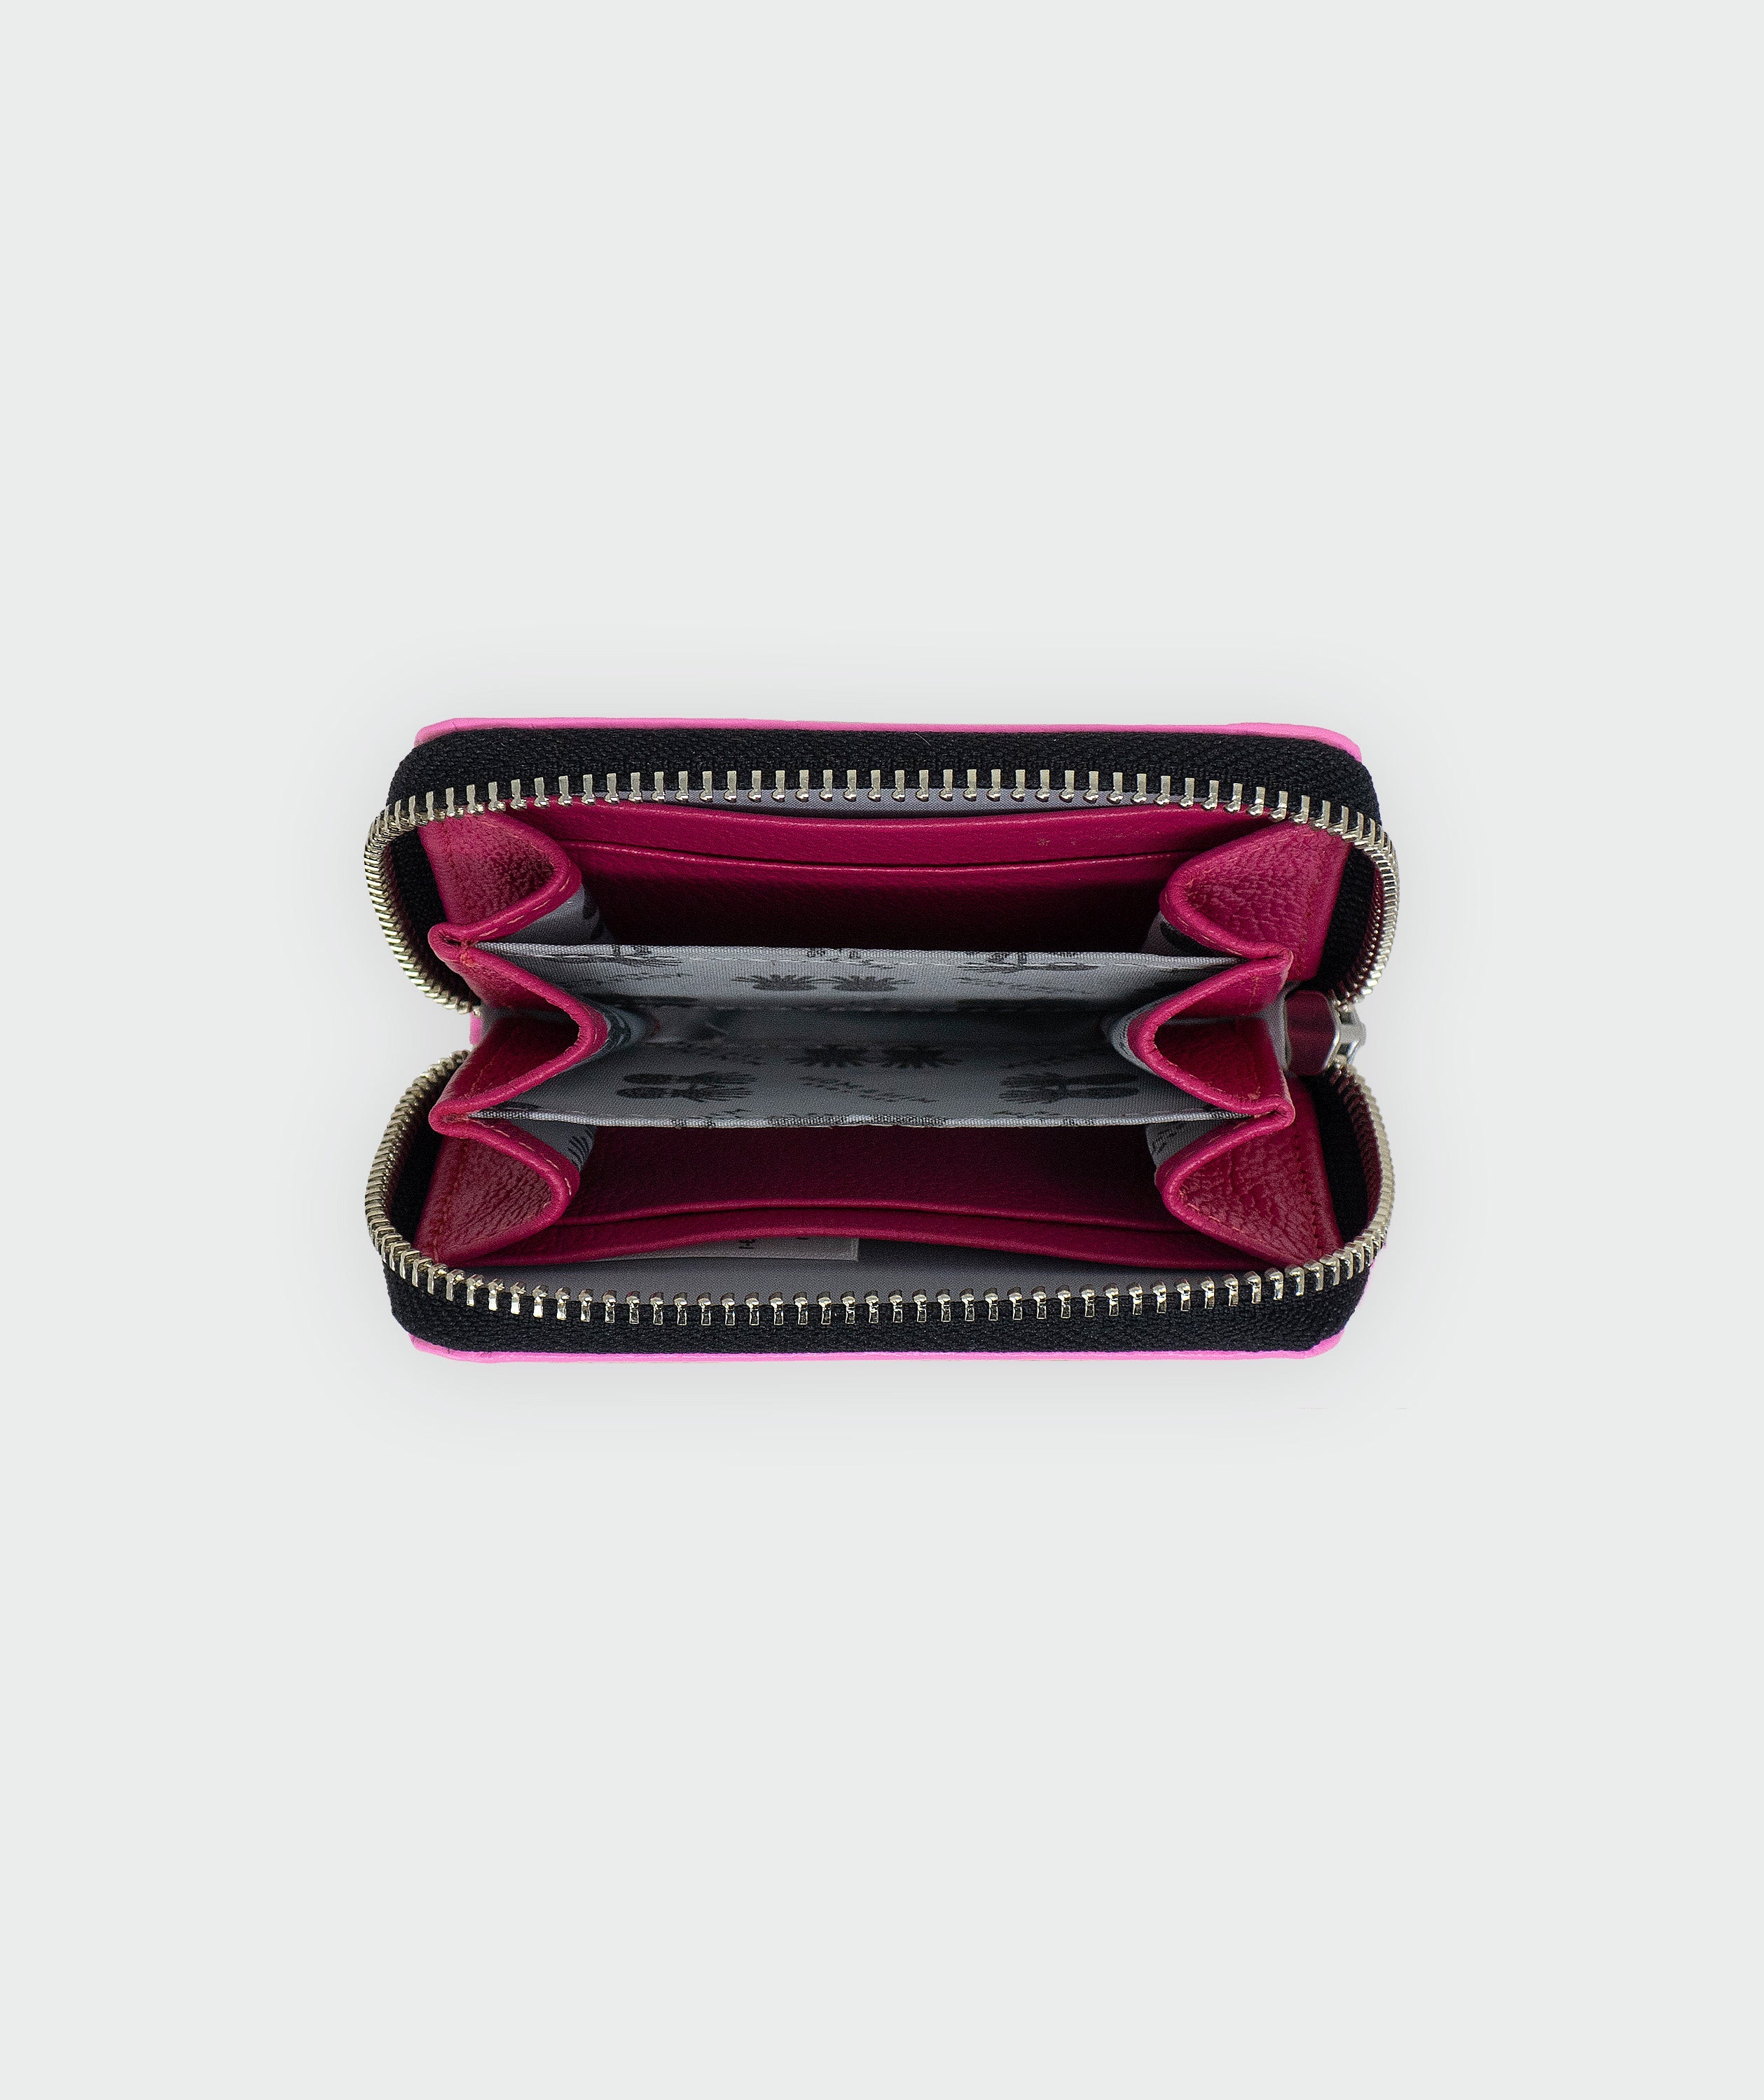 Frodo Bubblegum Pink Leather Wallet - Eyes Embroidery - Inside view